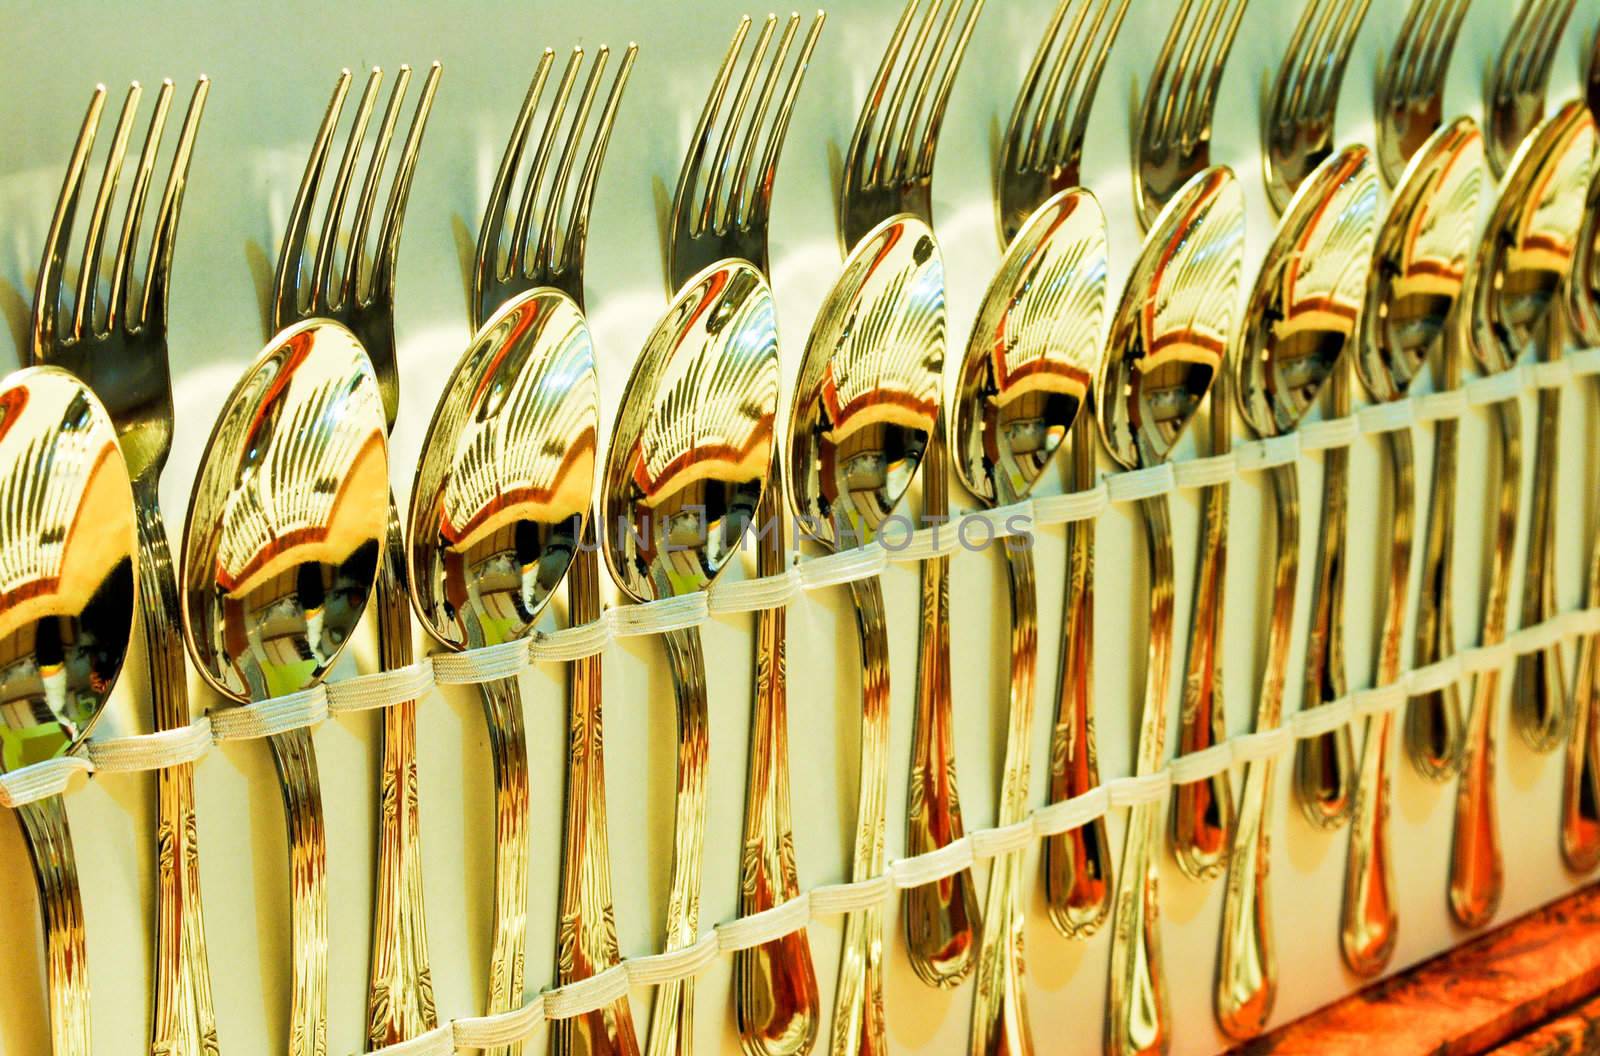 Shinny metal spoons, forks and knifes 